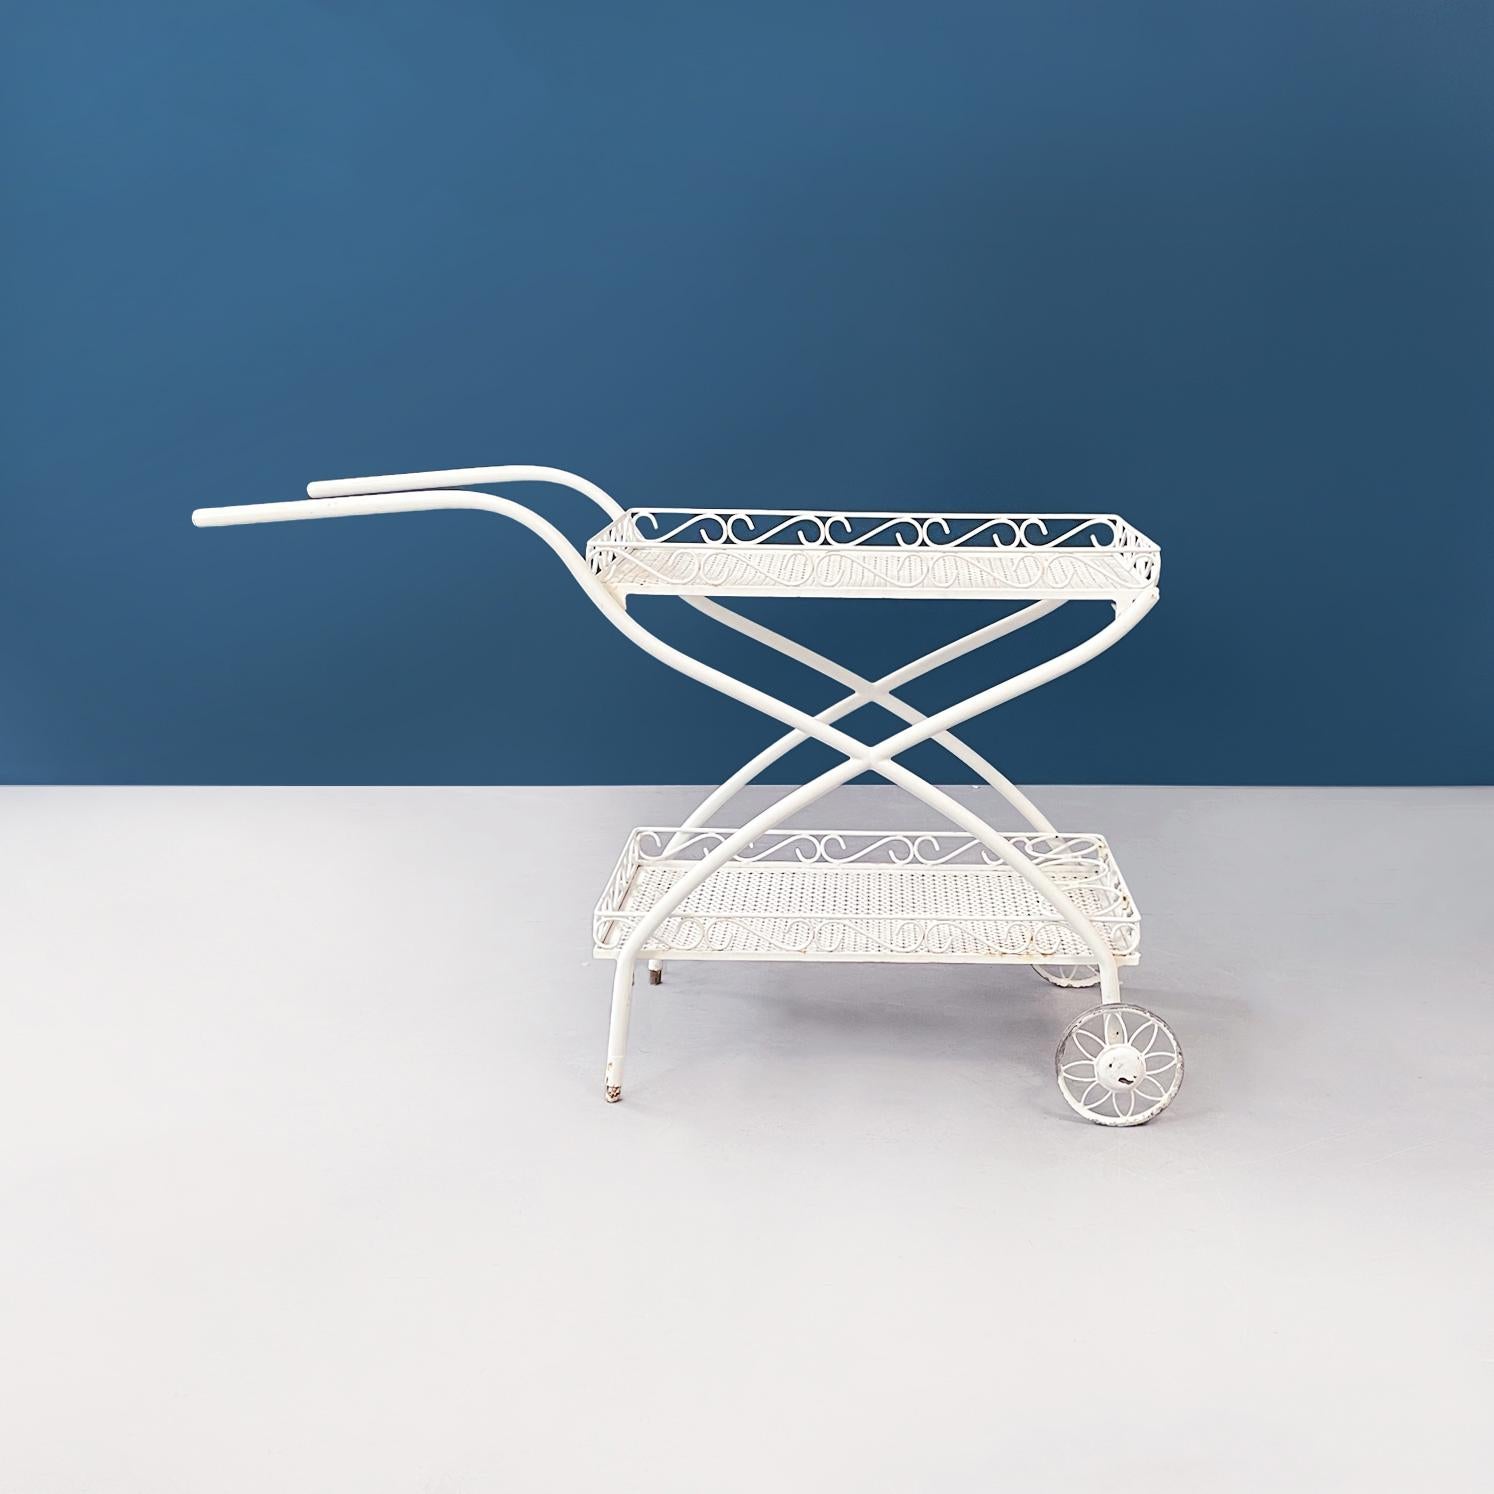 Italian mid-century white iron garden cart openwork with curls, 1960s
Outdoor cart in white painted iron. The cart has two compartments, with floral-shaped perforations, and finely worked edges with curls. On the lower shelf there are 3 bottle